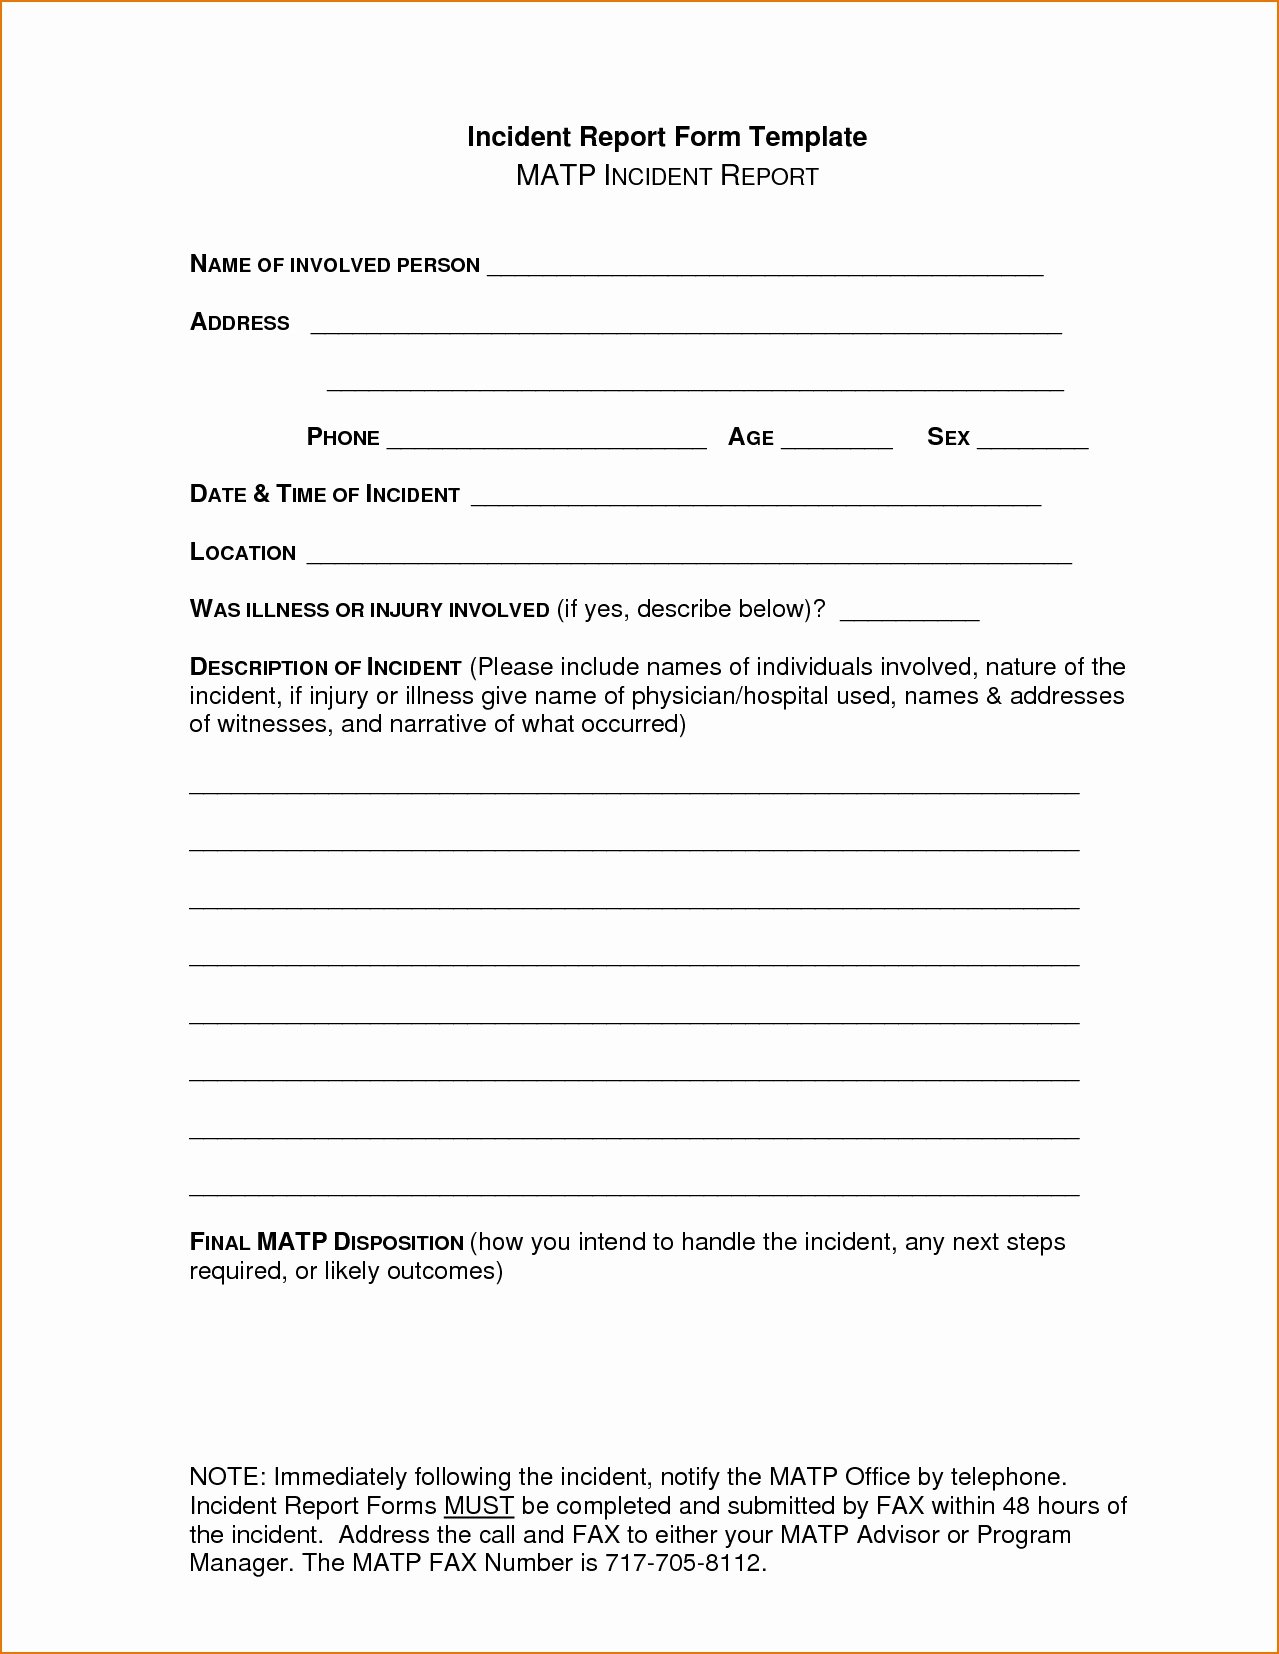 Police Incident Report Template New Incident Report Template Microsoft Word